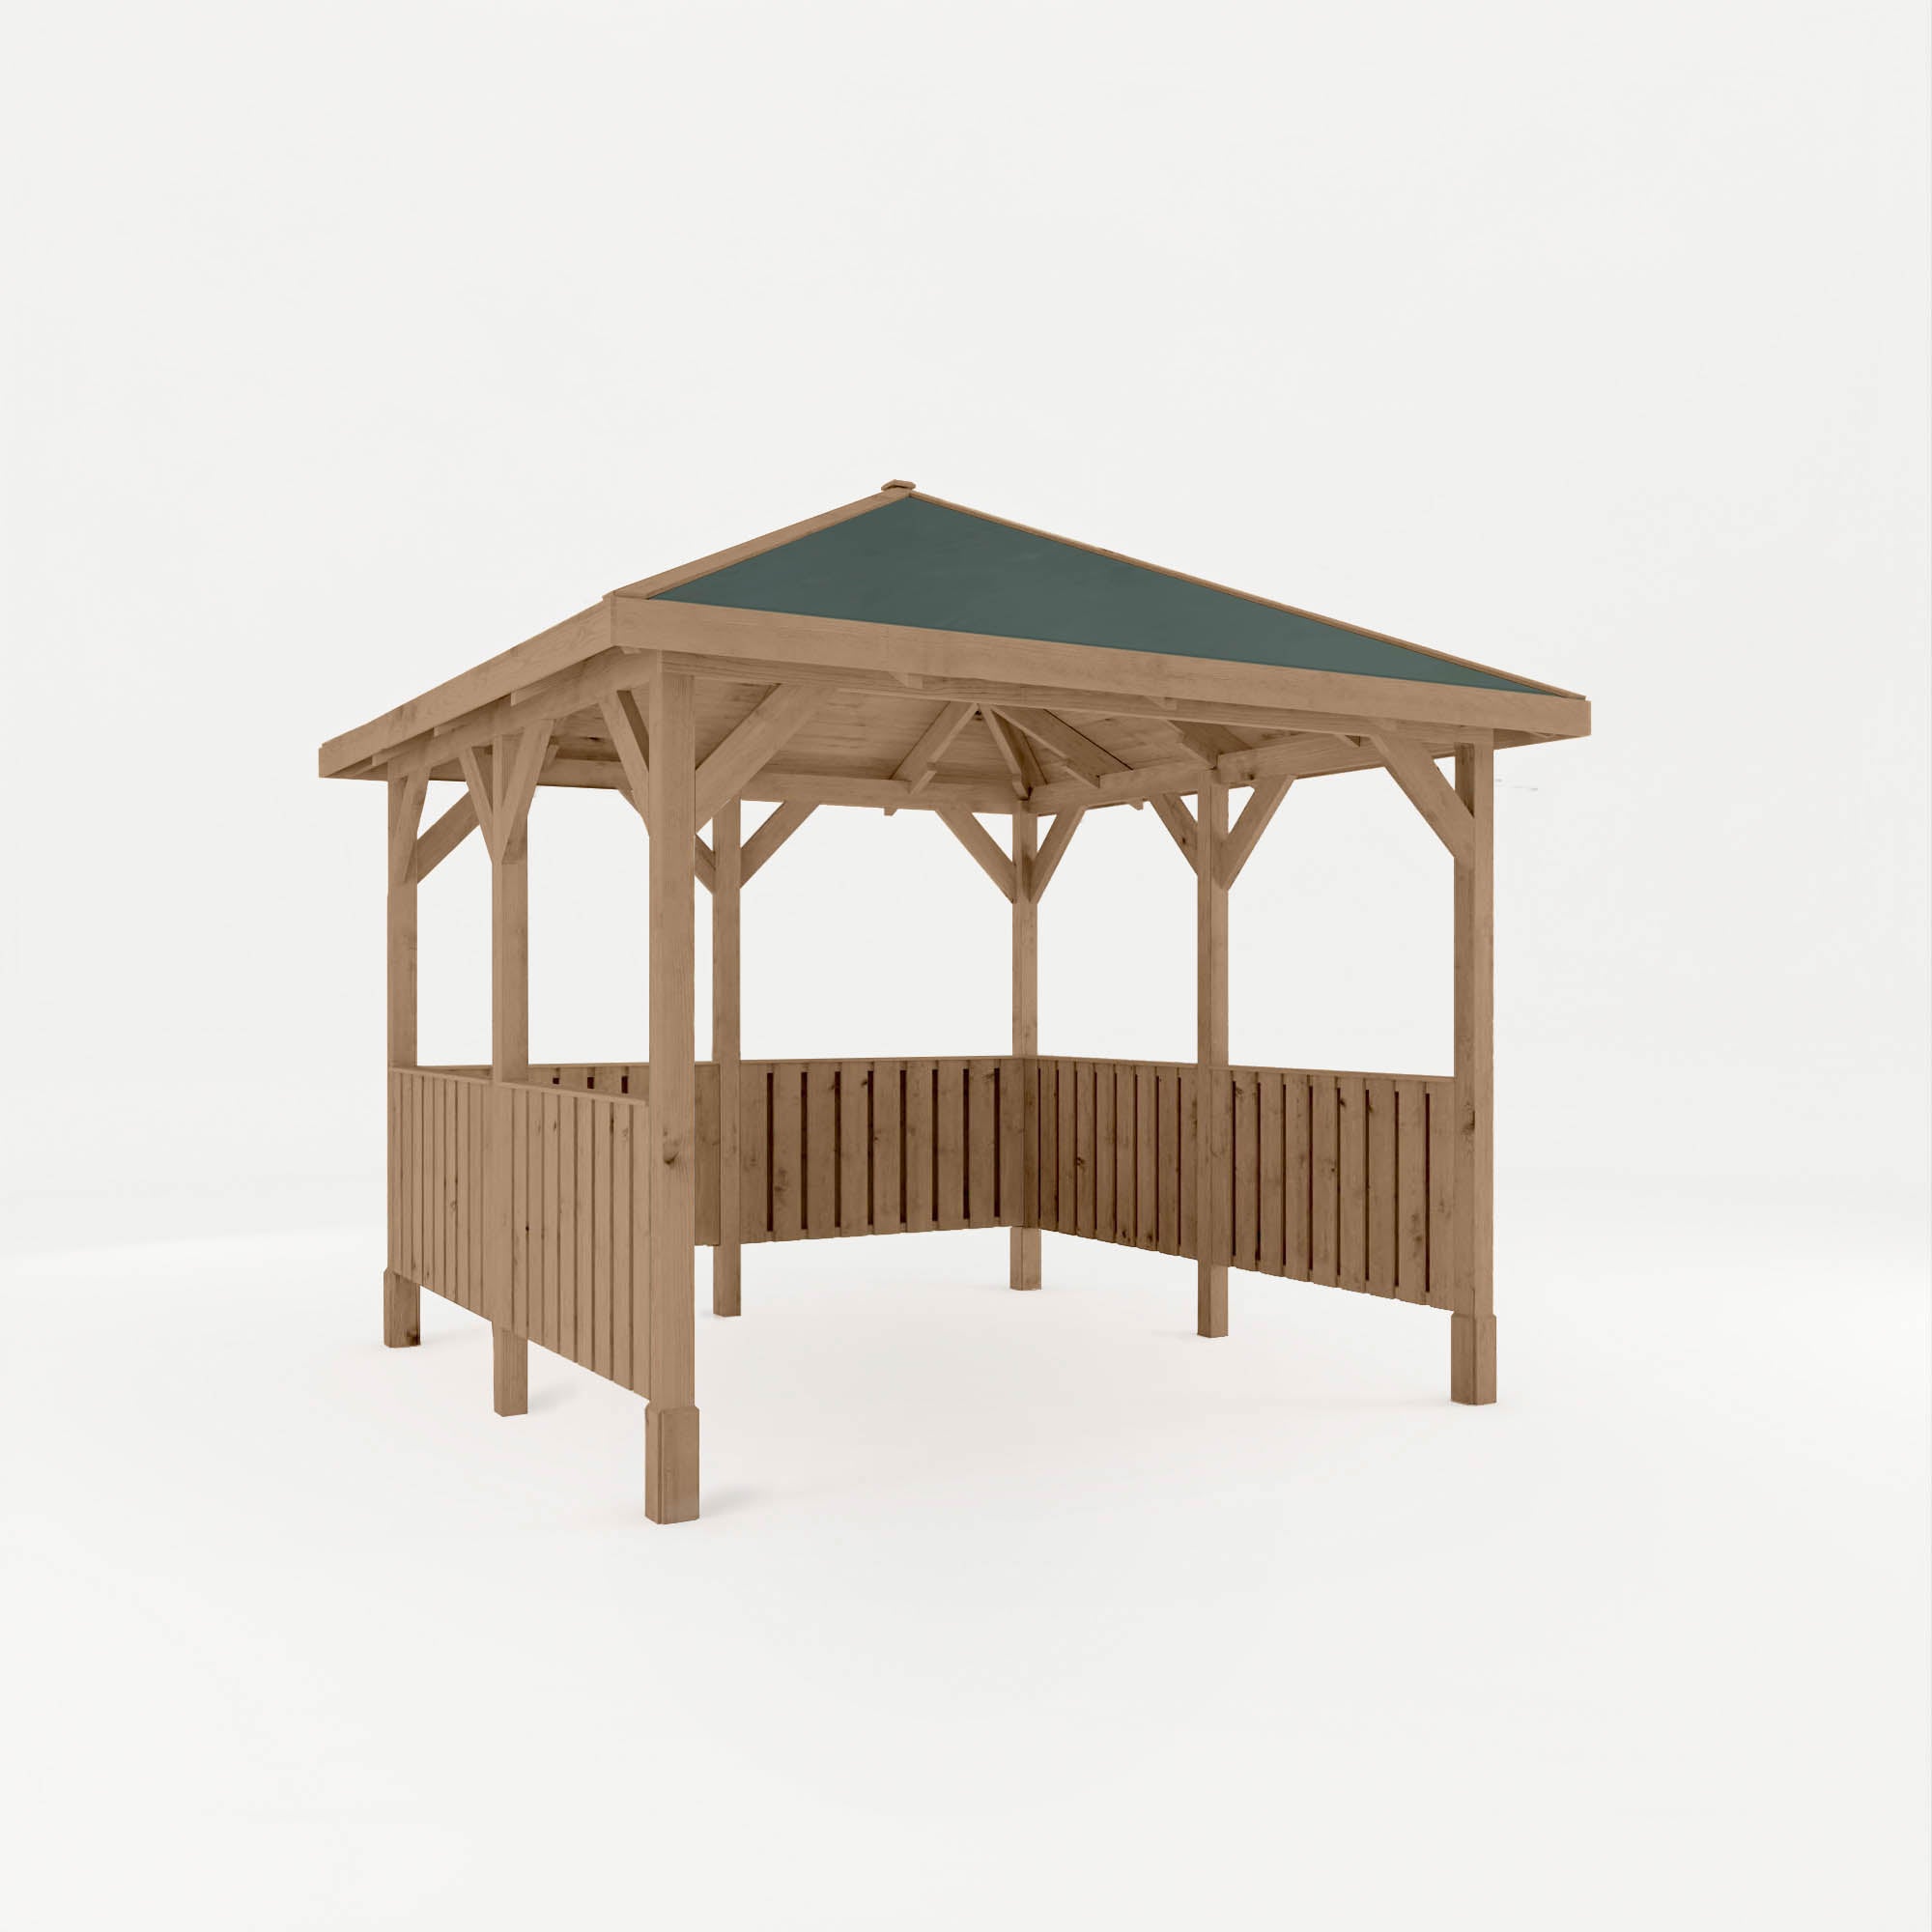 3m x 3m Pressure Treated Gazebo with Roof and Vertical Rails